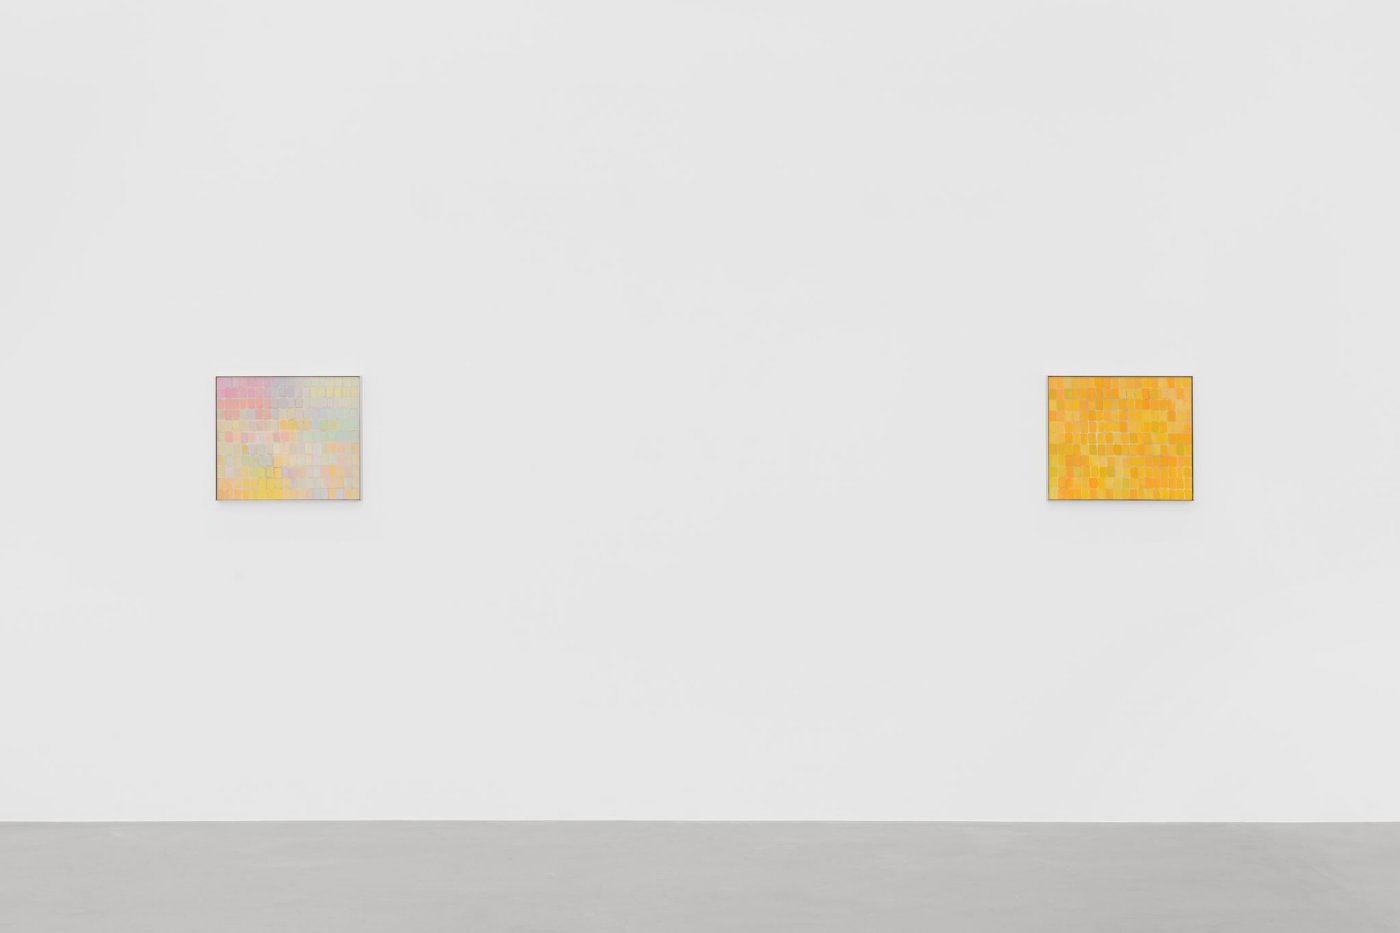 Installation image for Jean-Baptiste Bernadet: Time and Again, at Almine Rech